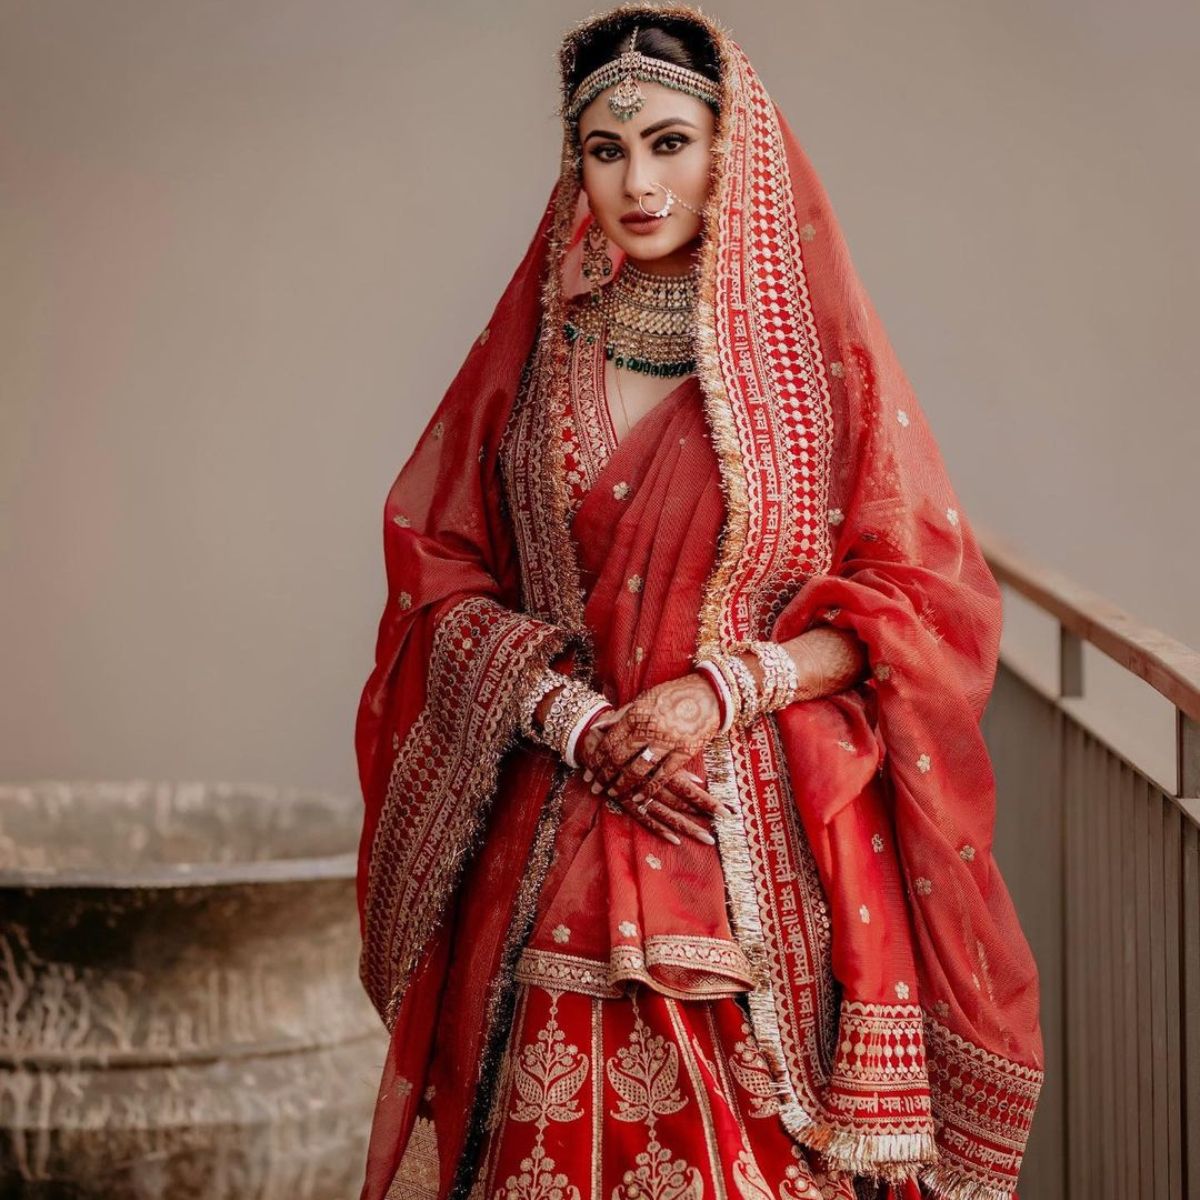 A stunning Bengali bride who stole our heart